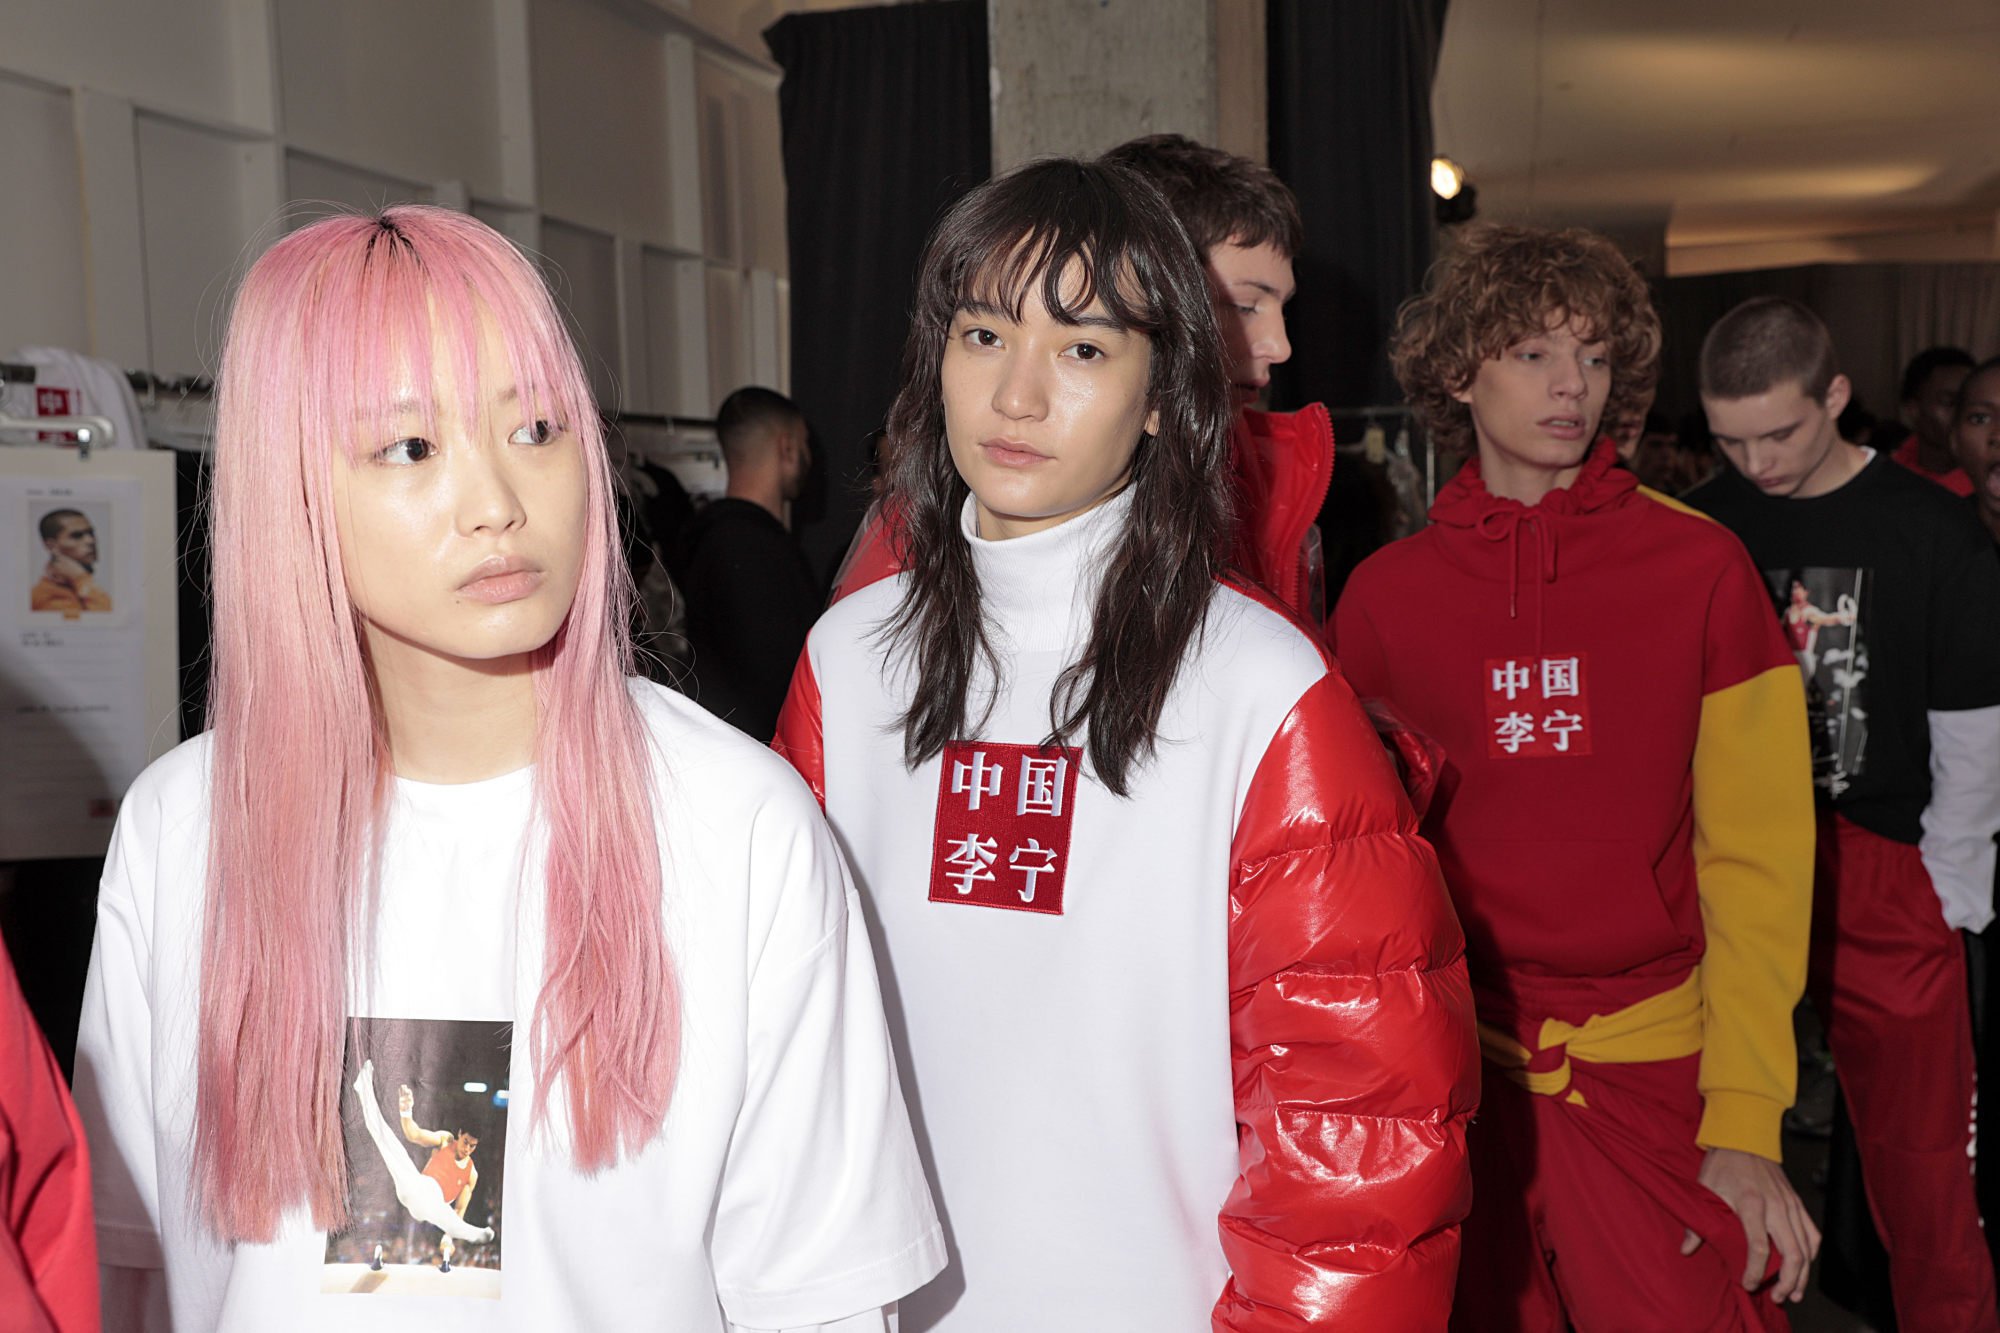 Sneaker Obsessed: Why Chinese Millennials are Shelling Out More Than E